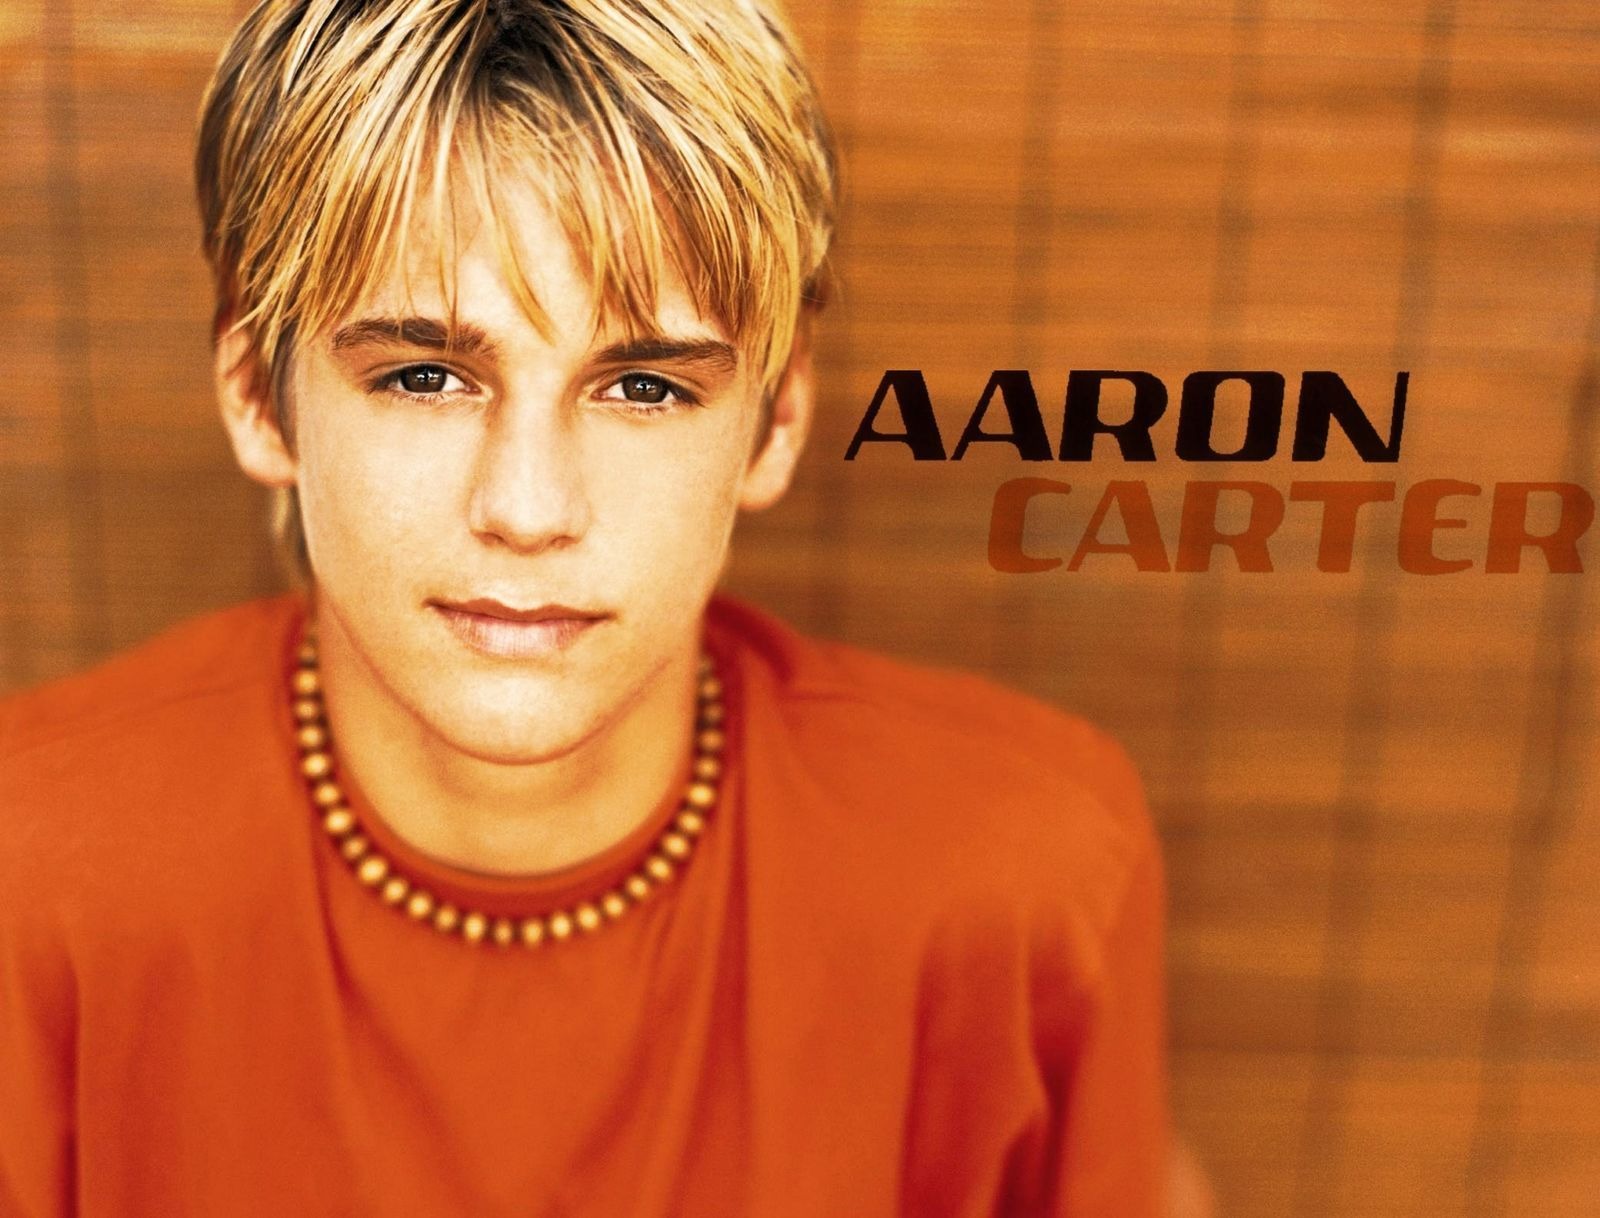 Remembering Aaron Carter A look back at a prominent 2000s celebrity 2